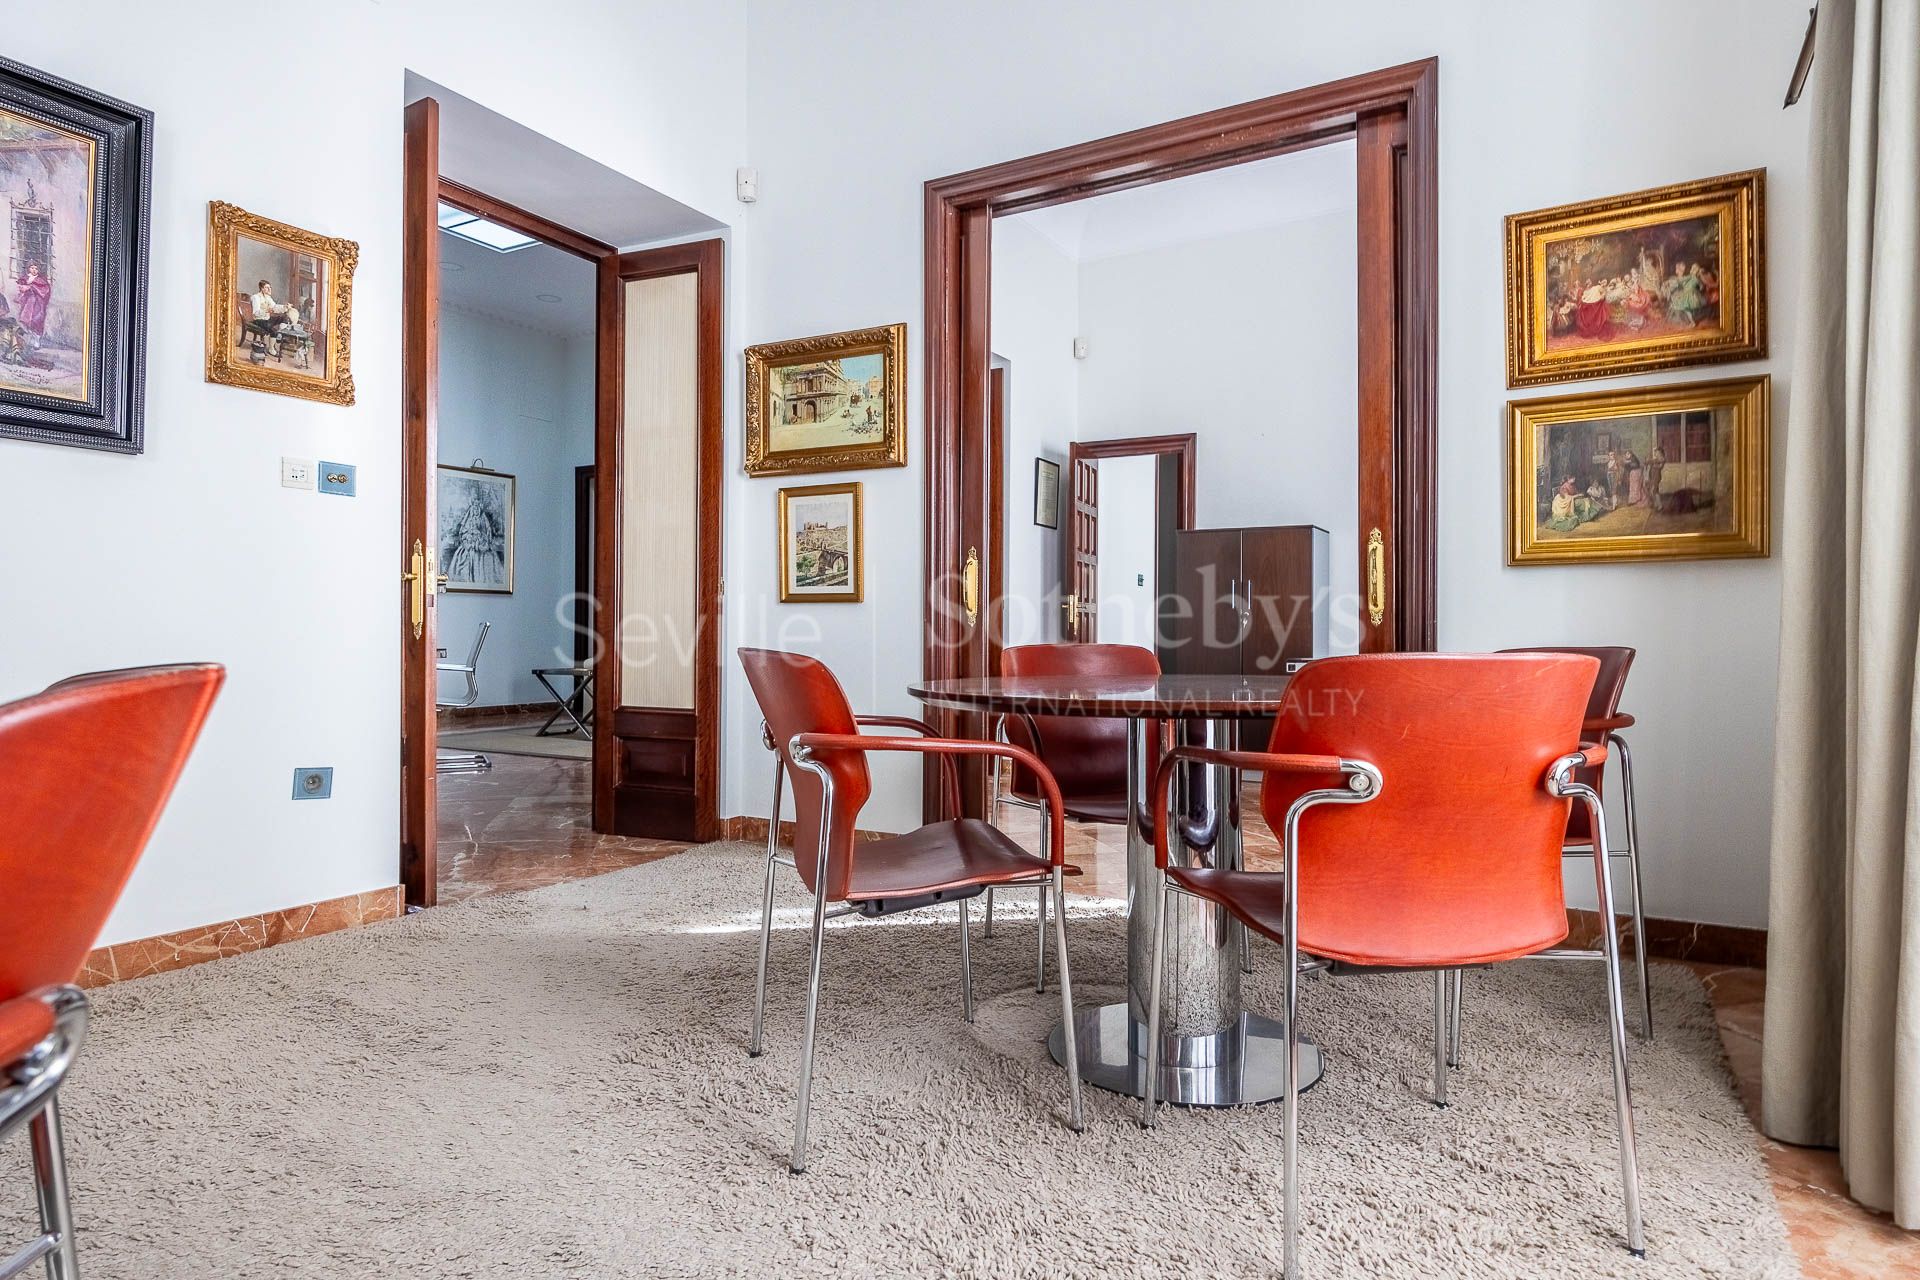 The property is located in the centre of Seville with prominent balconies facing Zaragoza Street